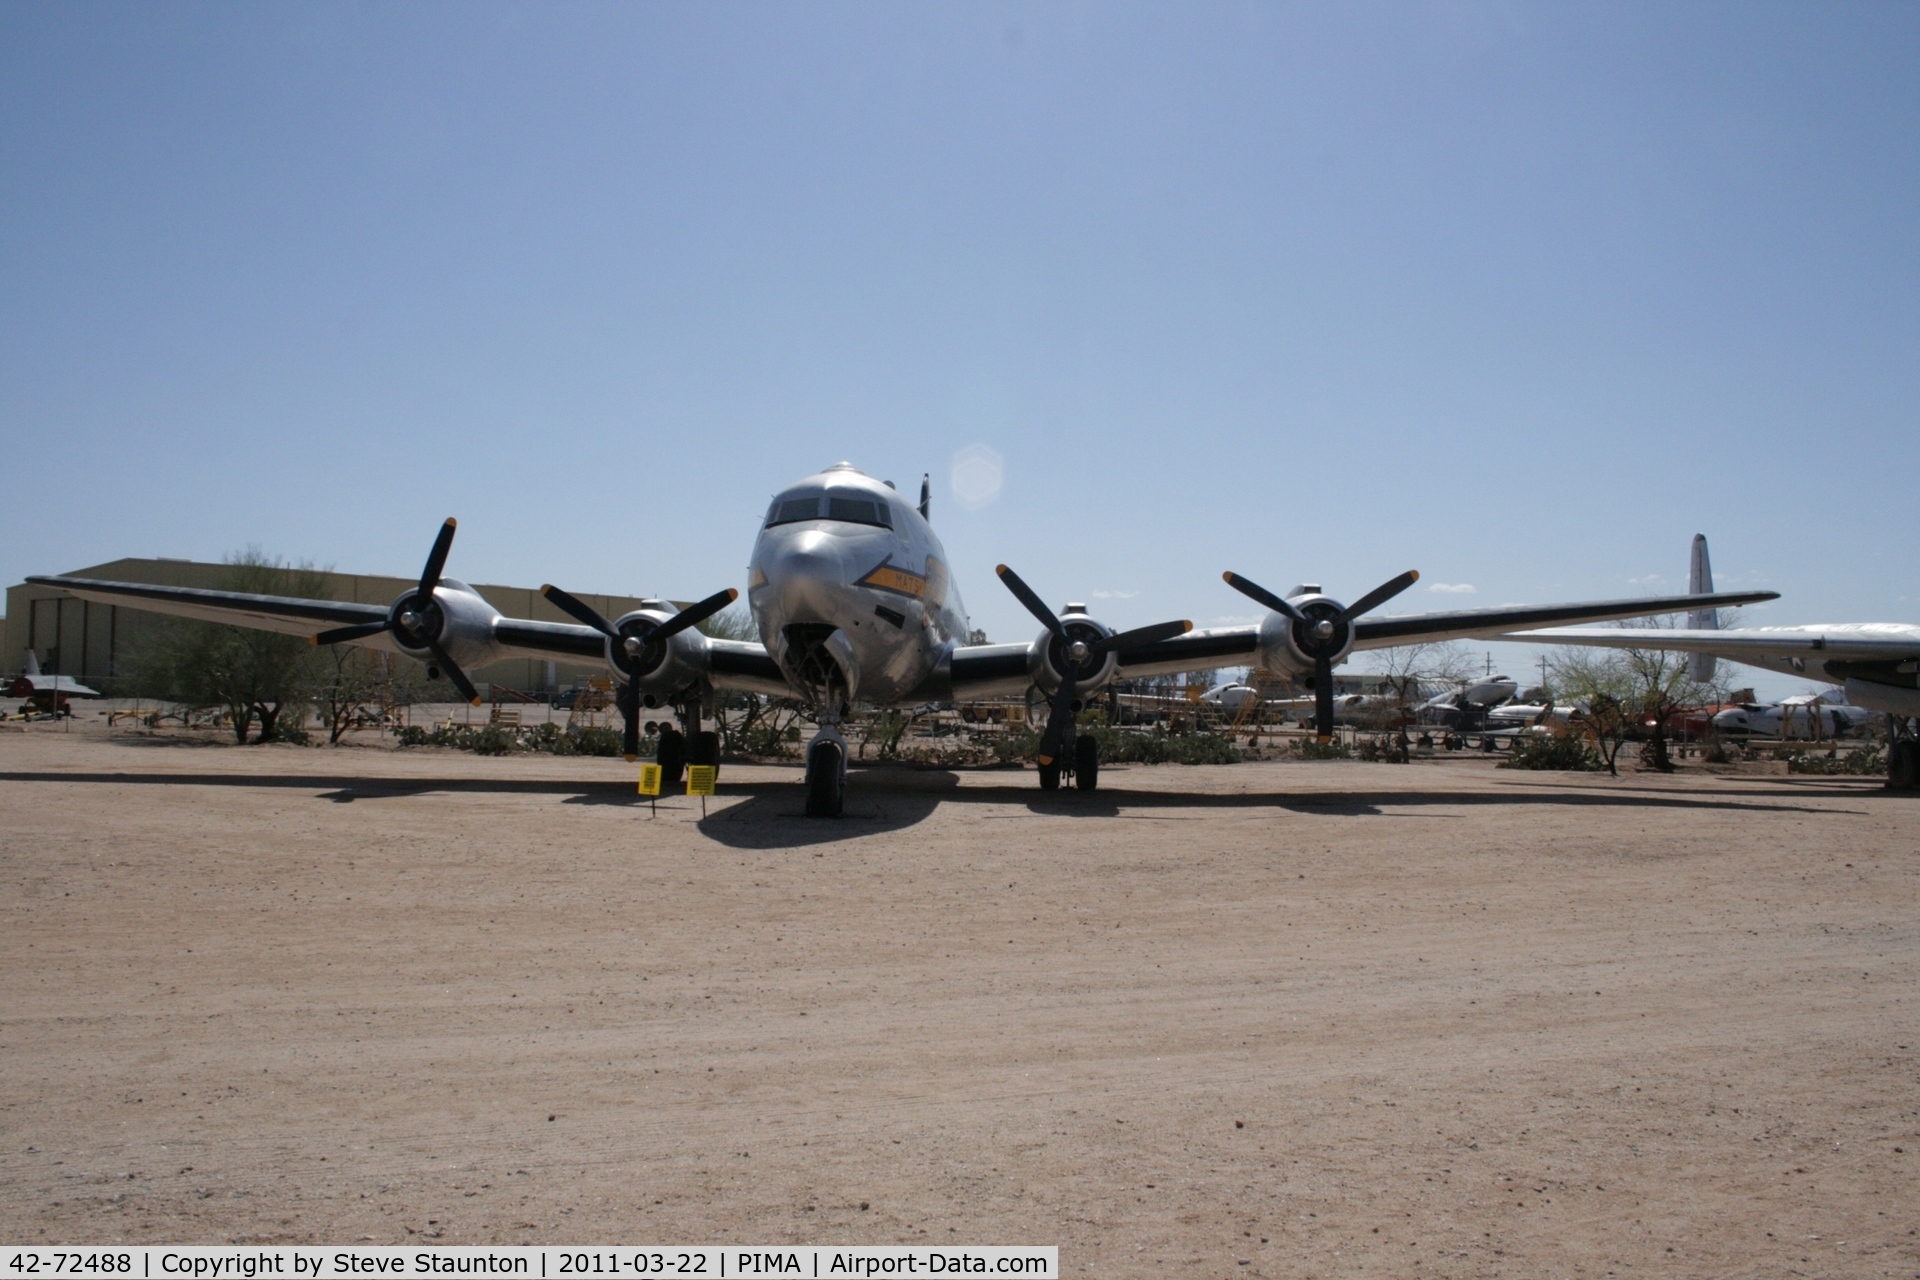 42-72488, Douglas C-54D Skymaster C/N 10593/324, Taken at Pima Air and Space Museum, in March 2011 whilst on an Aeroprint Aviation tour